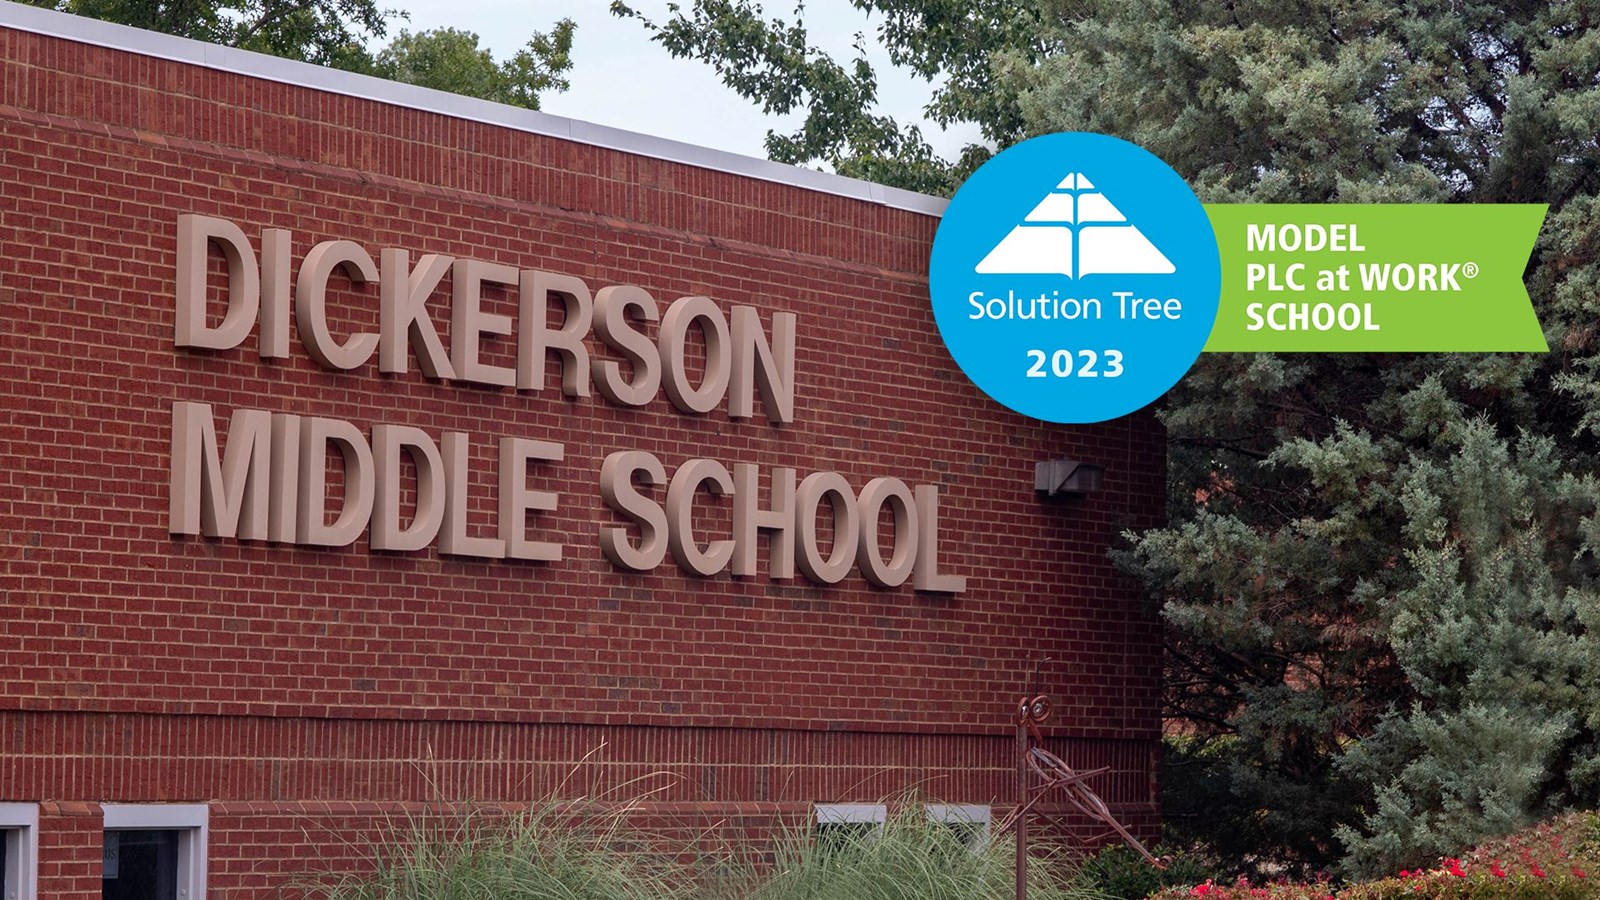 Dickerson Middle School named Model PLC at Work school